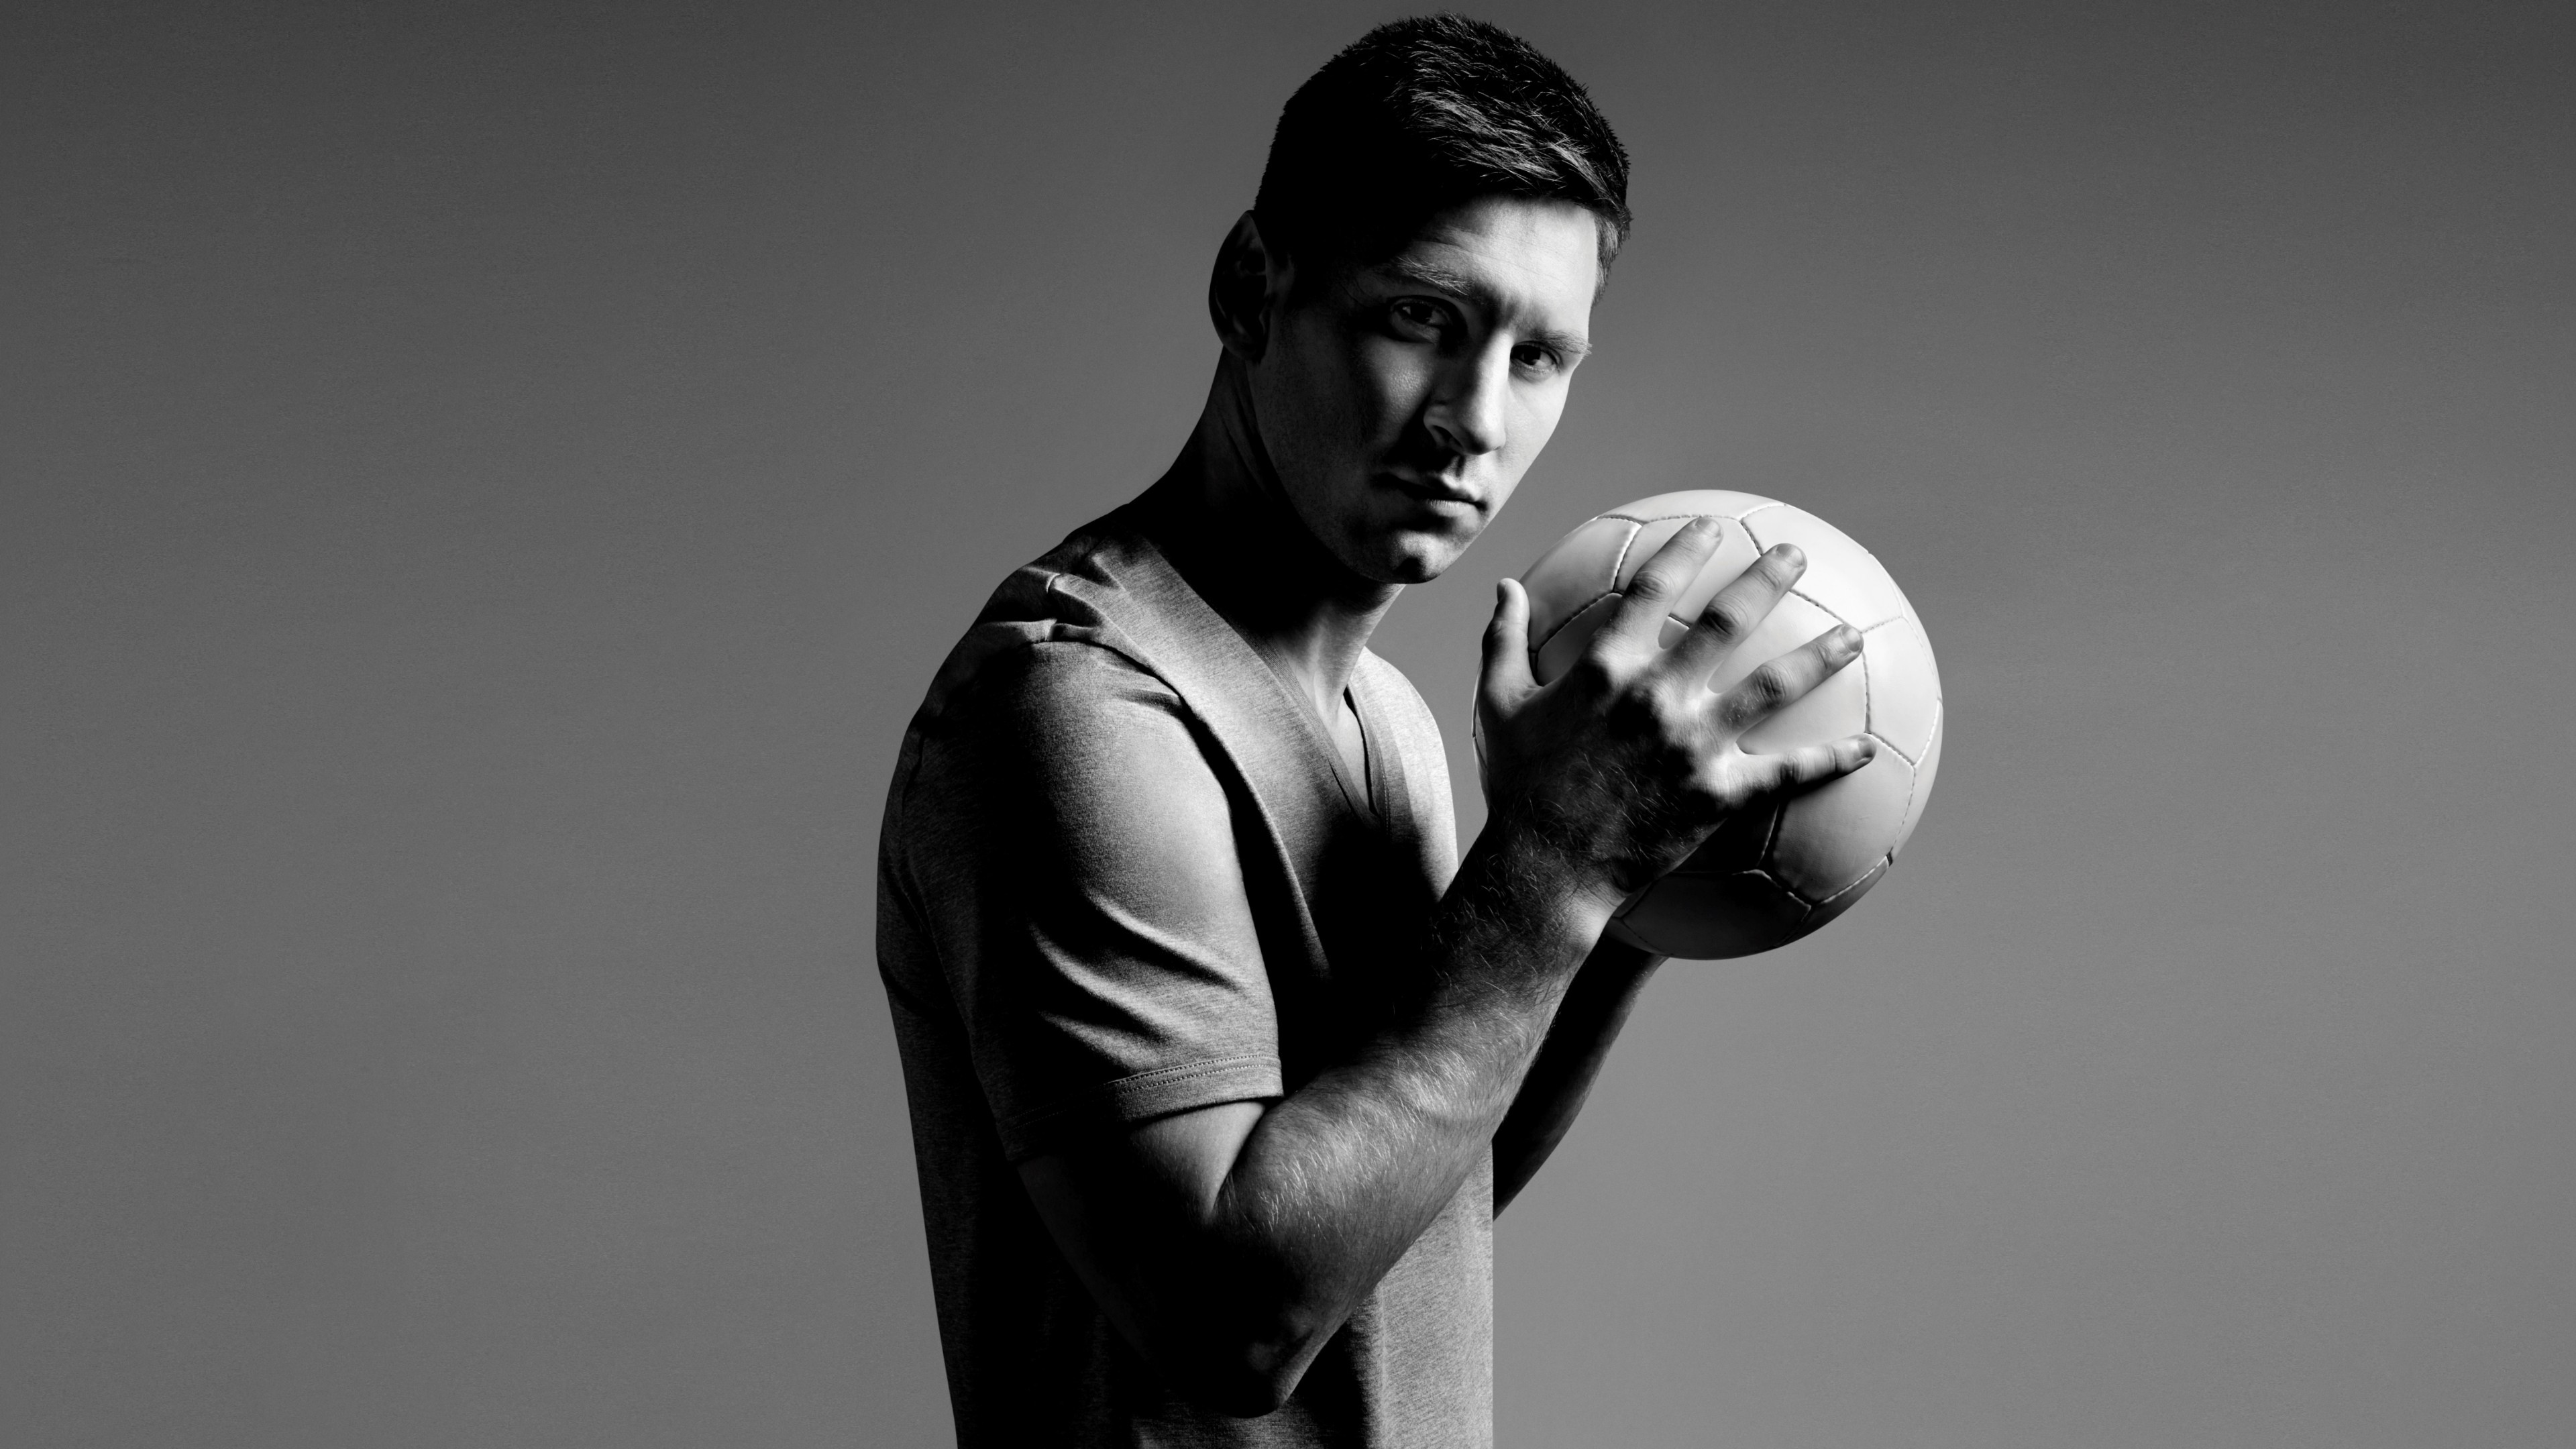 People 3840x2160 footballers men monochrome Argentina Lionel Messi soccer ball soccer gray background